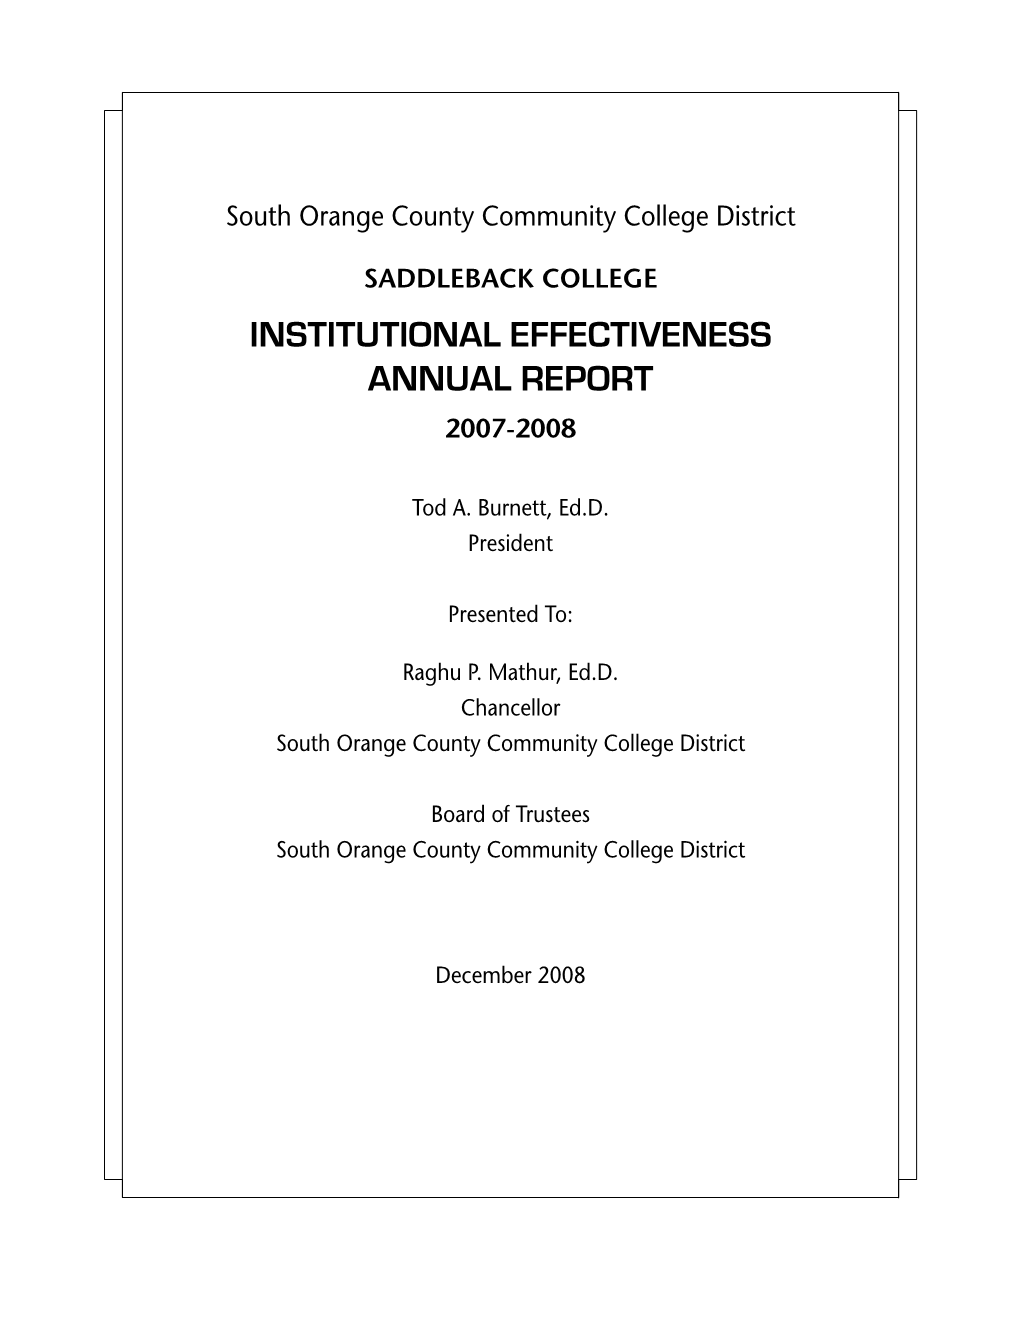 Saddleback College Institutional Effectiveness Annual Report 2007-08